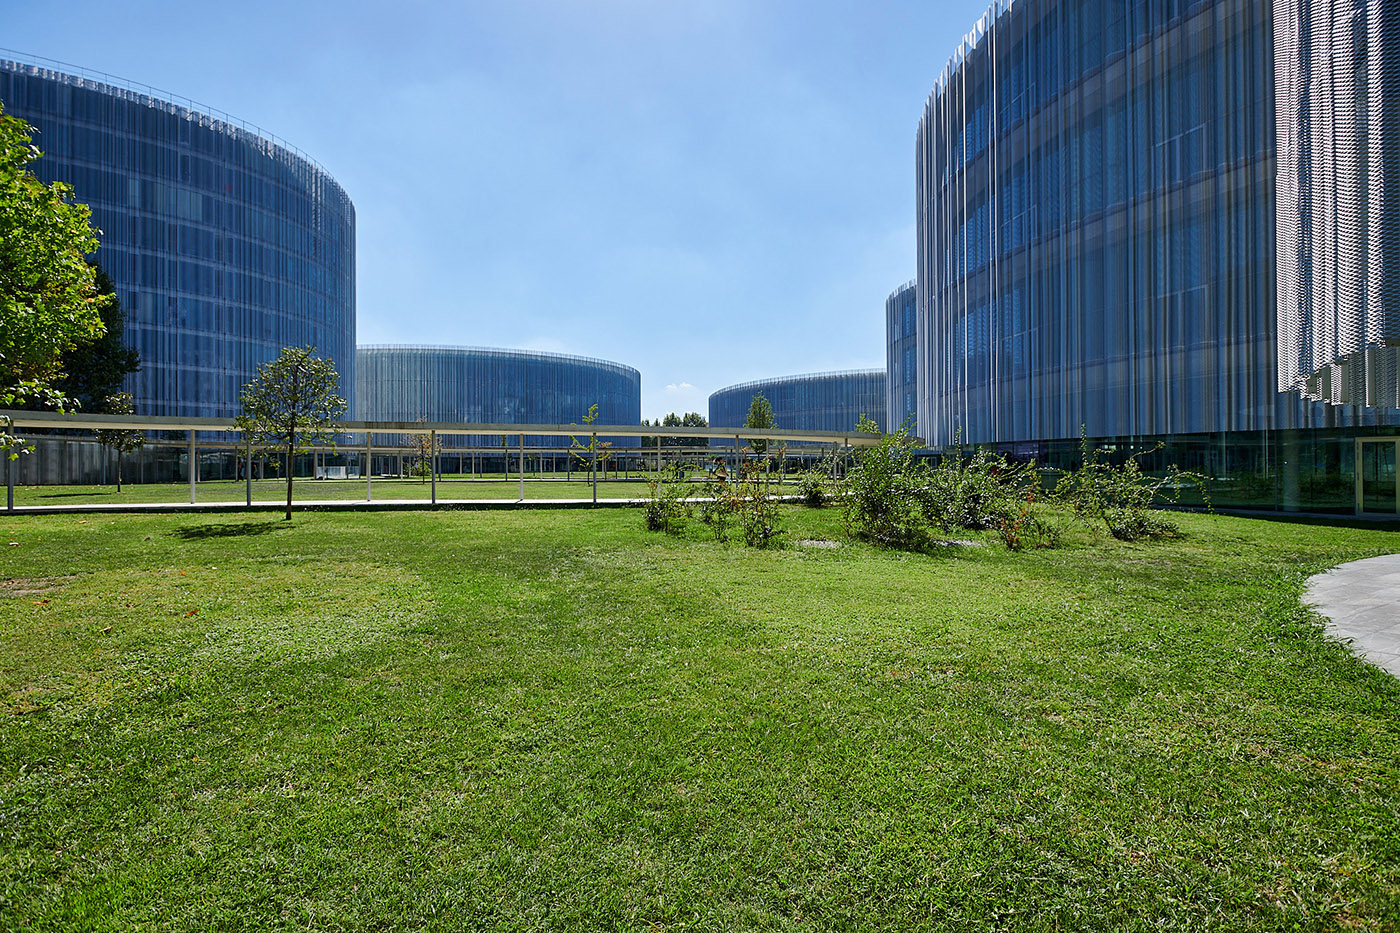 Photo shooting dedicated to the new SDA Bocconi Campus